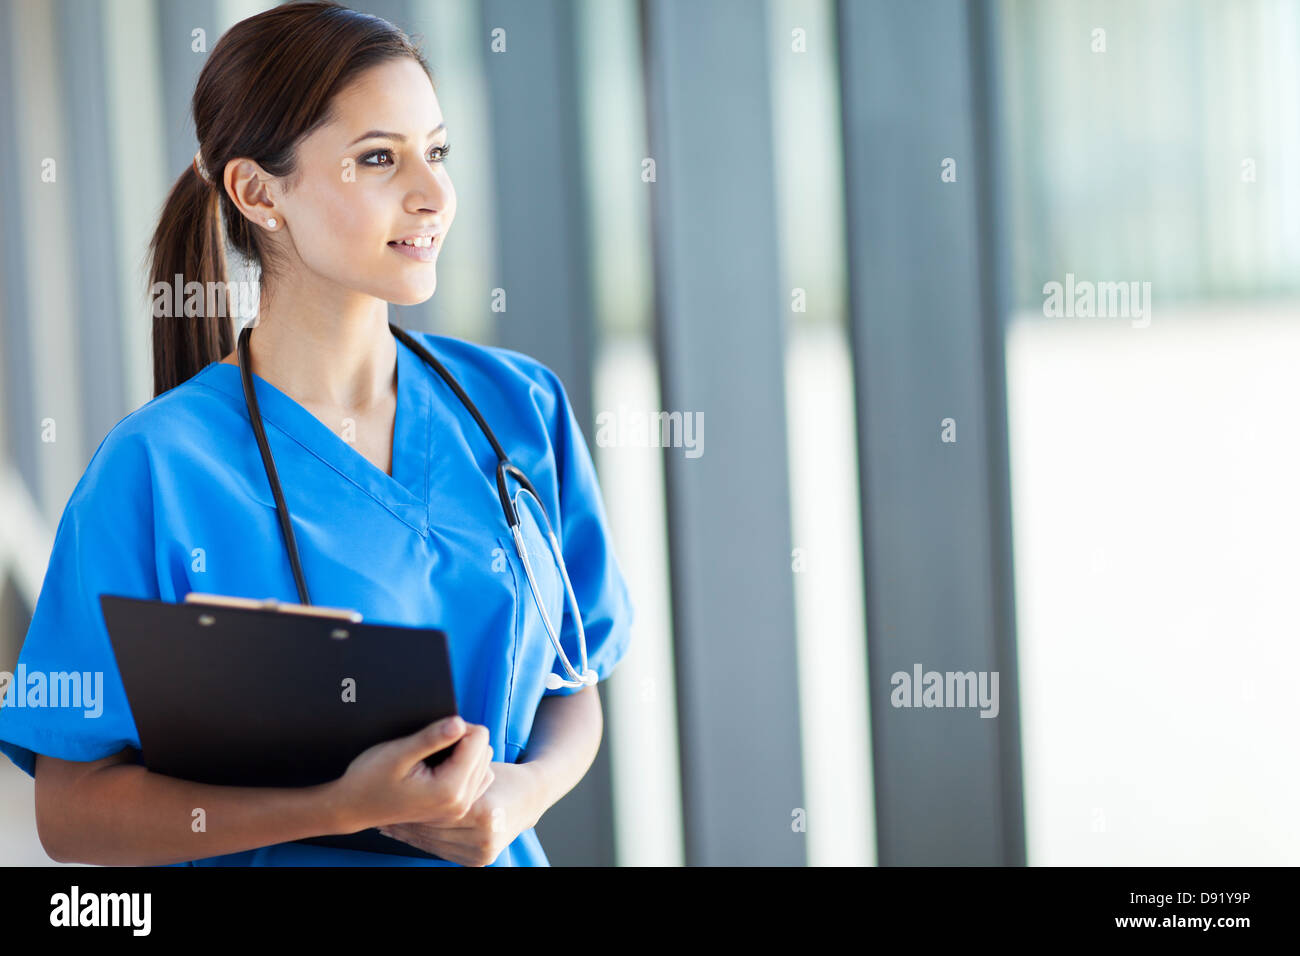 beautiful young female medical intern looking outside window Stock Photo